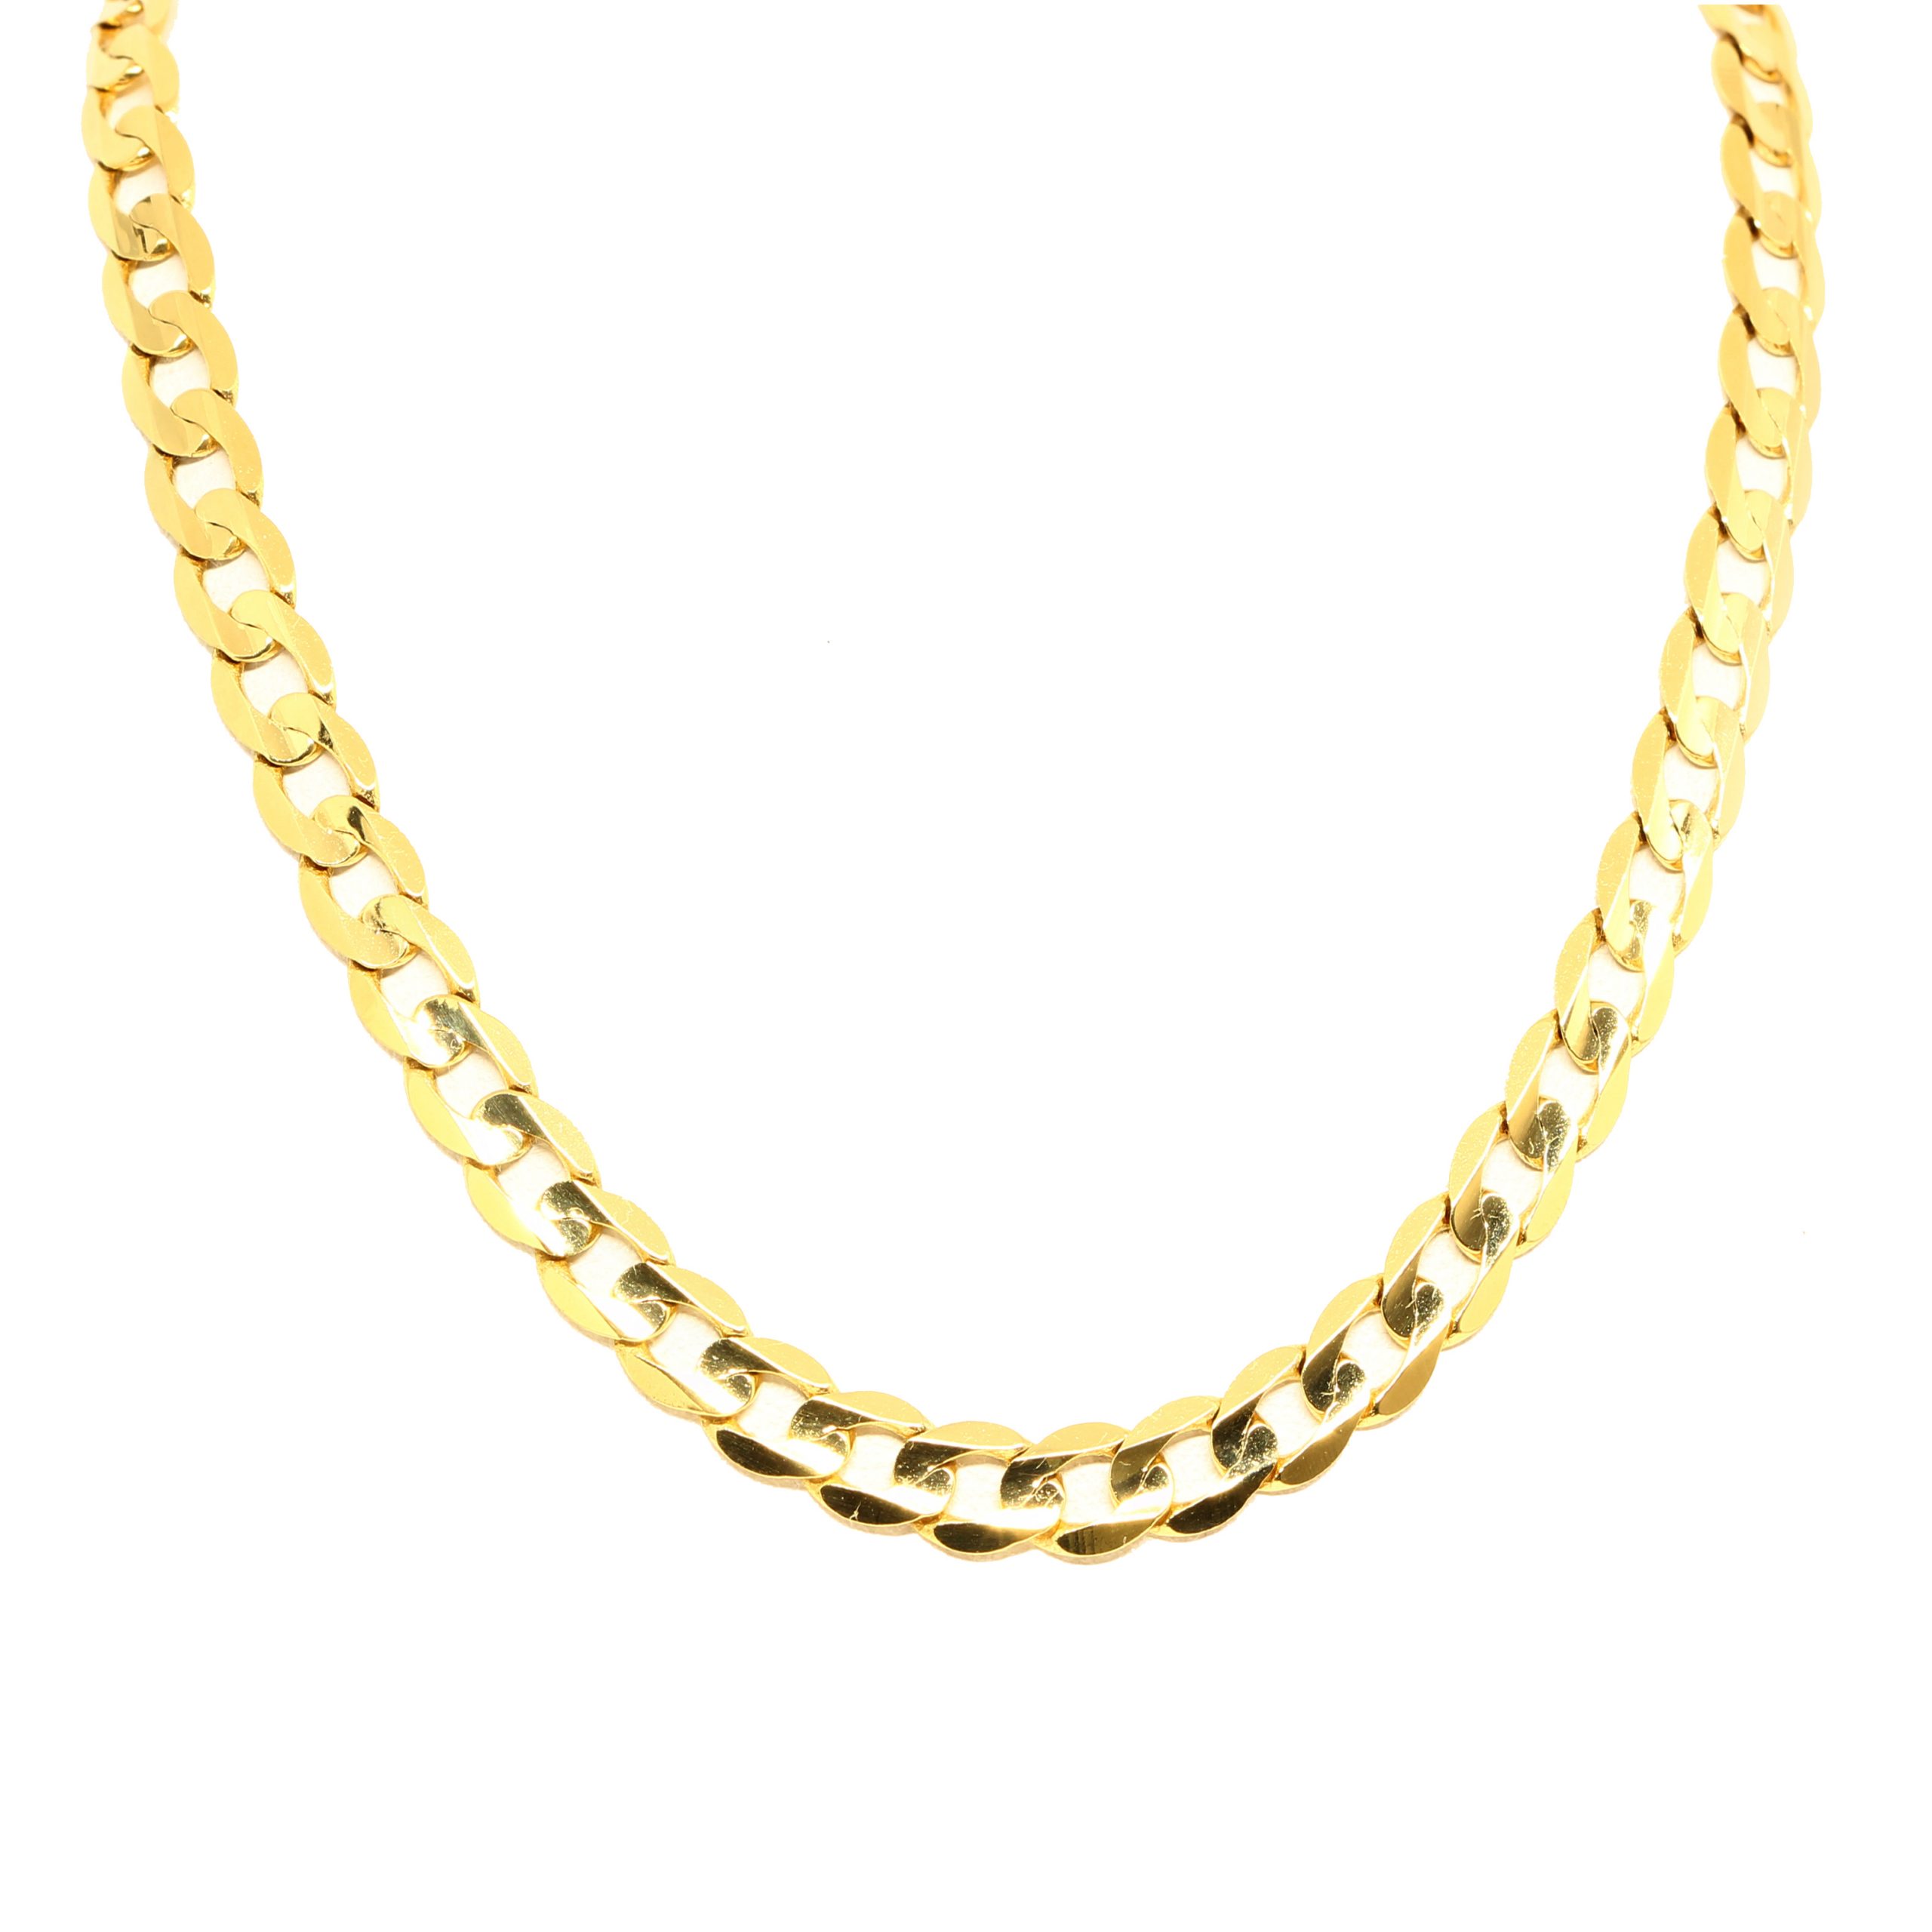 Miami Cuban Link 14K Chain 14MM, Real Solid Heavy Premium Gold Overlay  Jewelry Pendant Necklace 30 inch : Amazon.in: Fashion